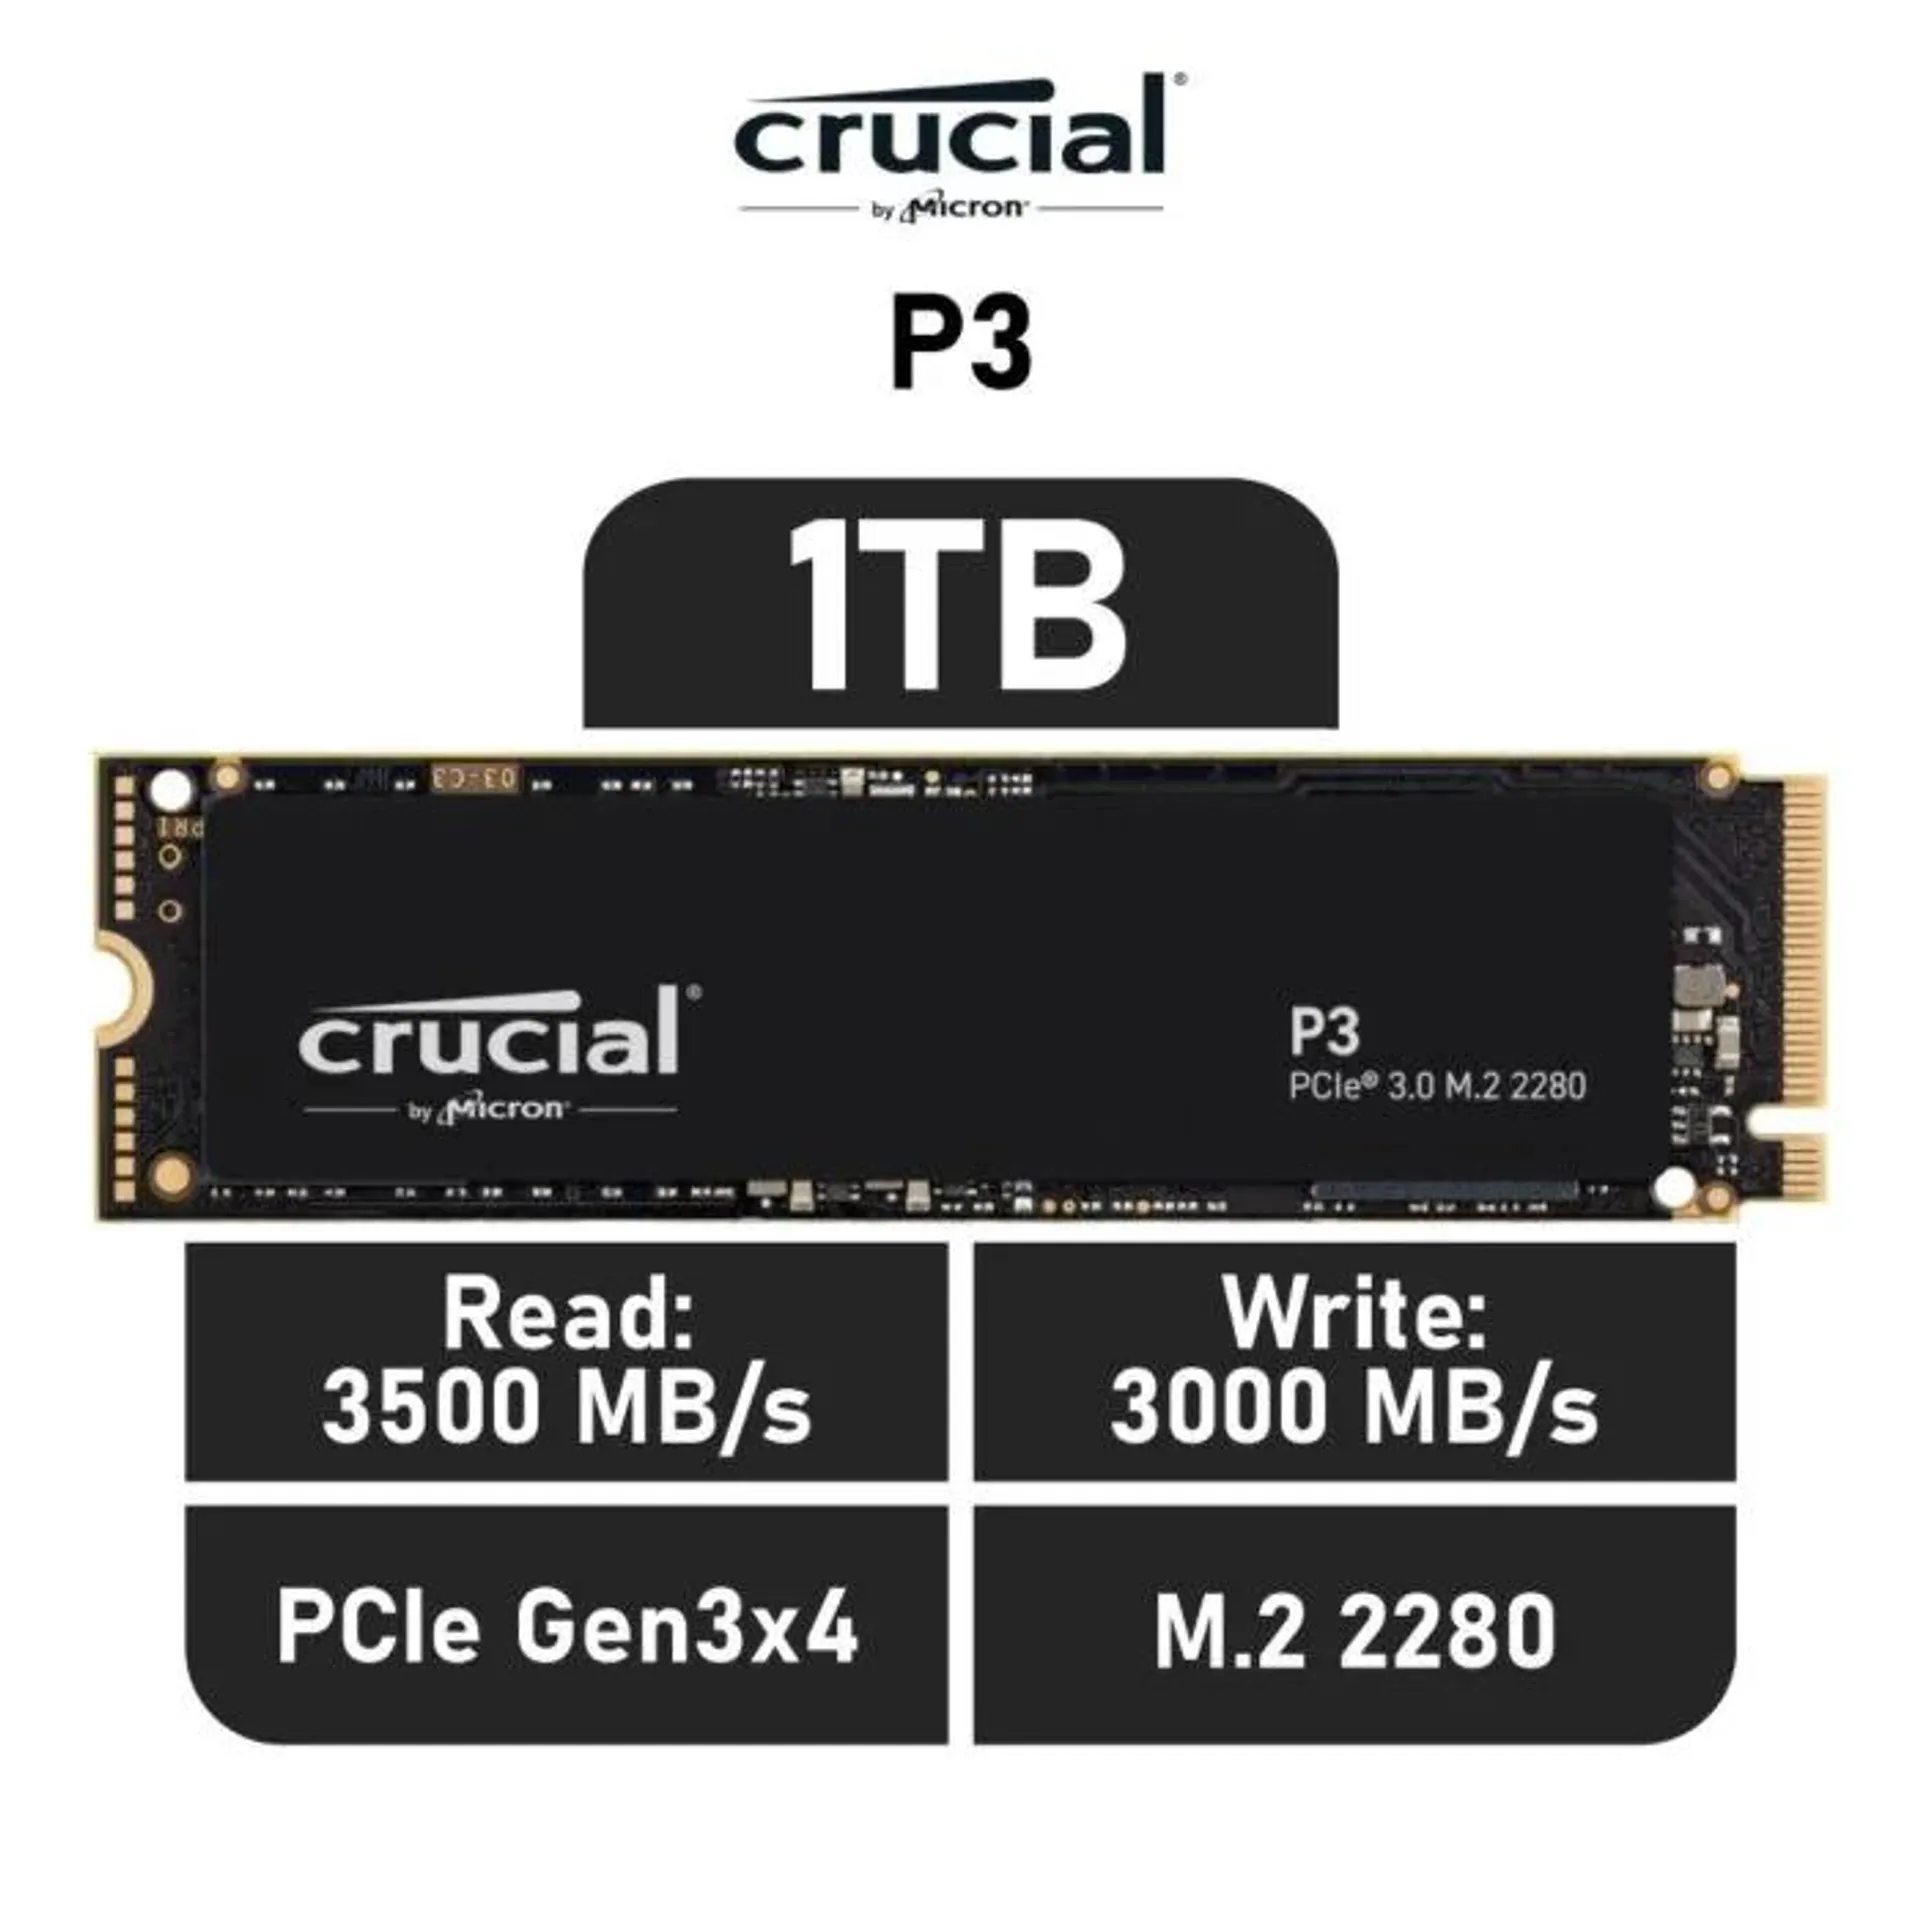 Crucial P3 1TB PCIe Gen3x4 CT1000P3SSD8 M.2 2280 Solid State Drive